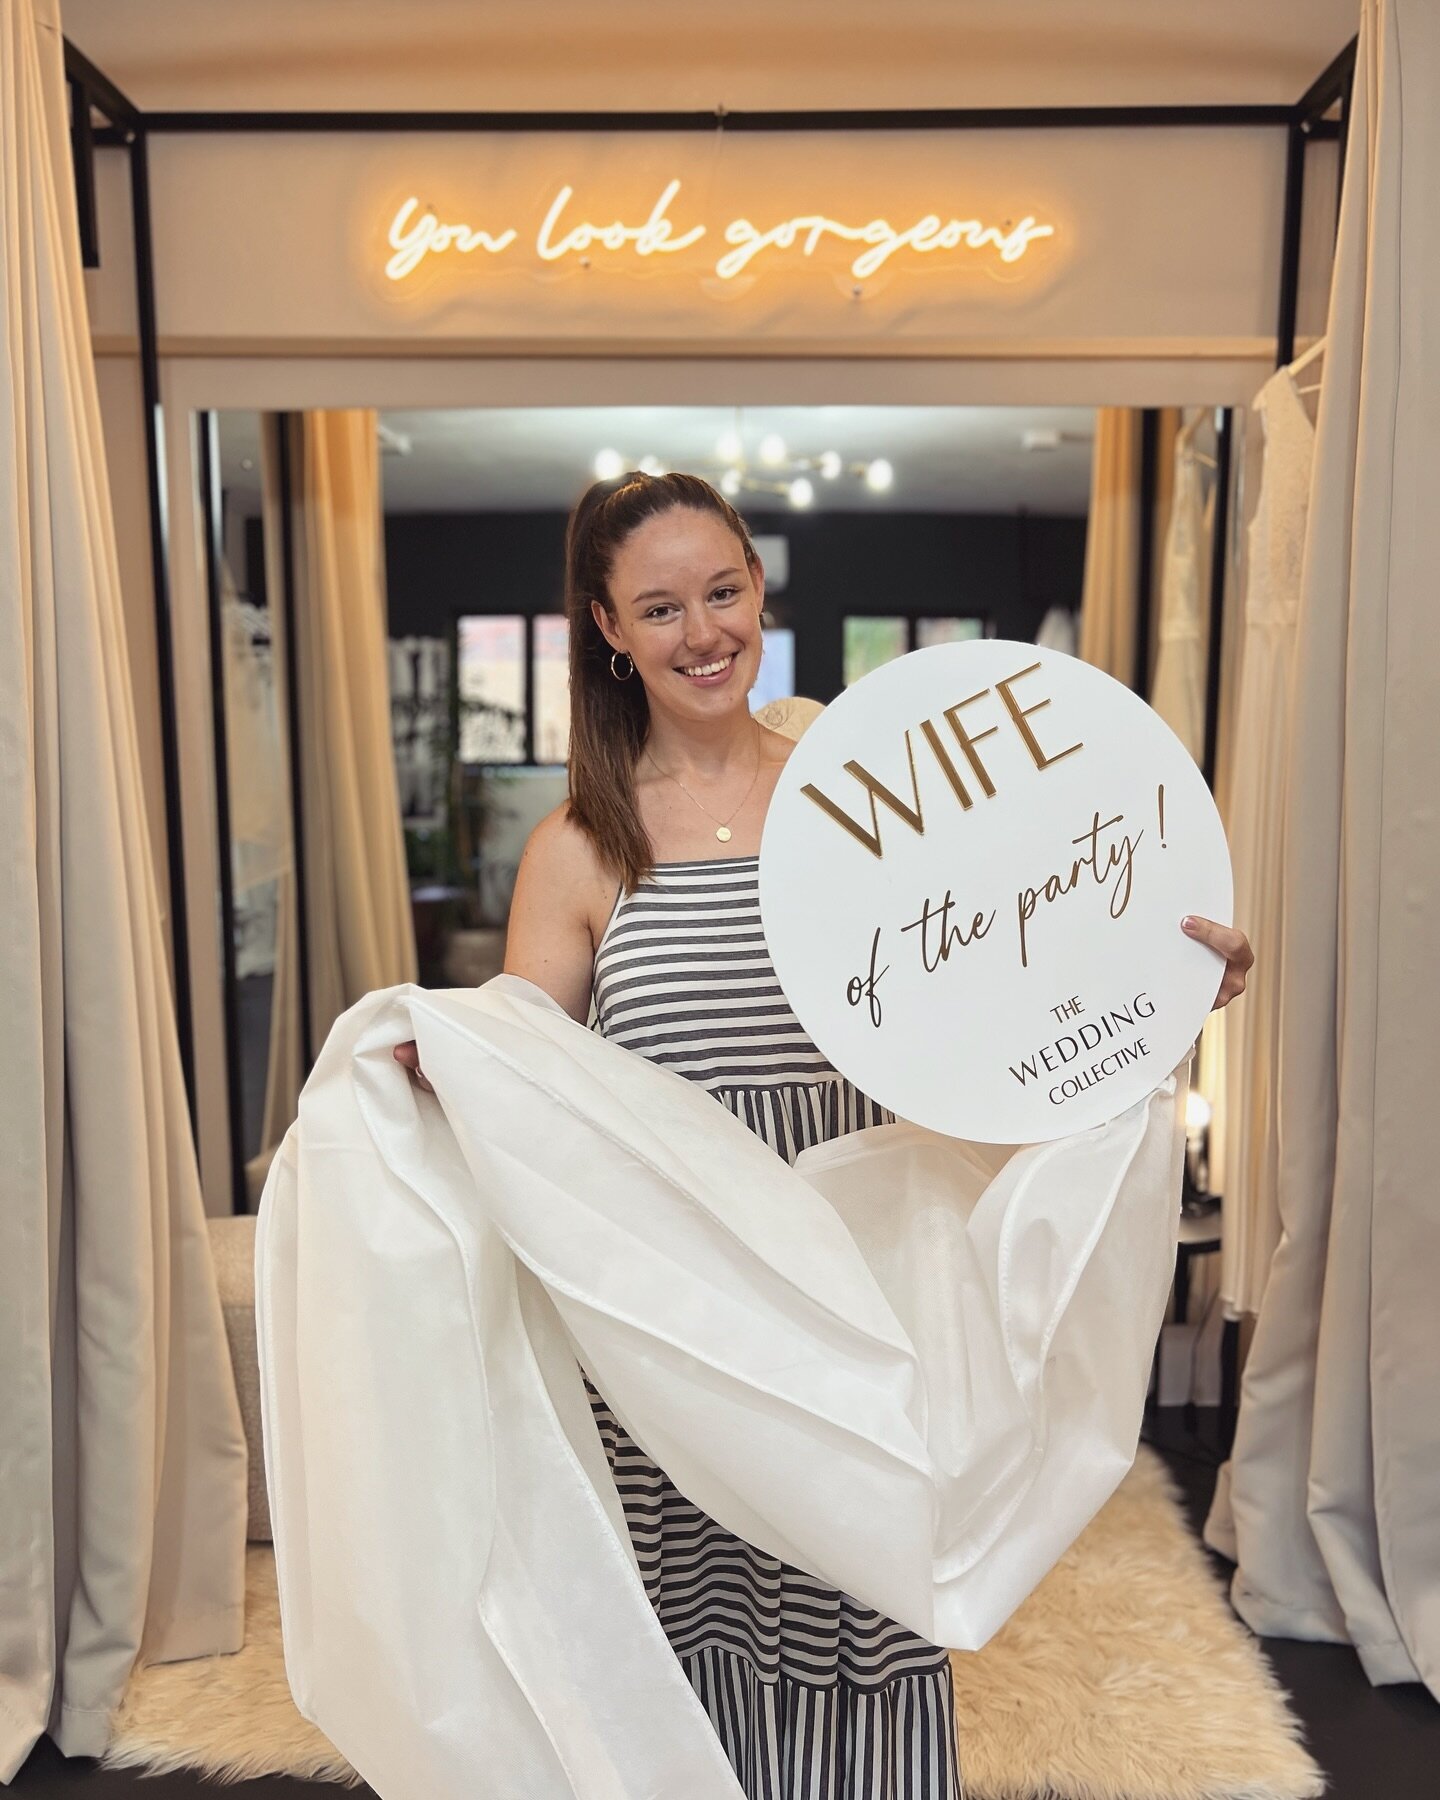 Our gorgeous #TWCrealbride Monique is almost getting married! We are so excited to see how beautiful she is going to look on her big day! Enjoy every second Monique, we loved having you as a bride 💖